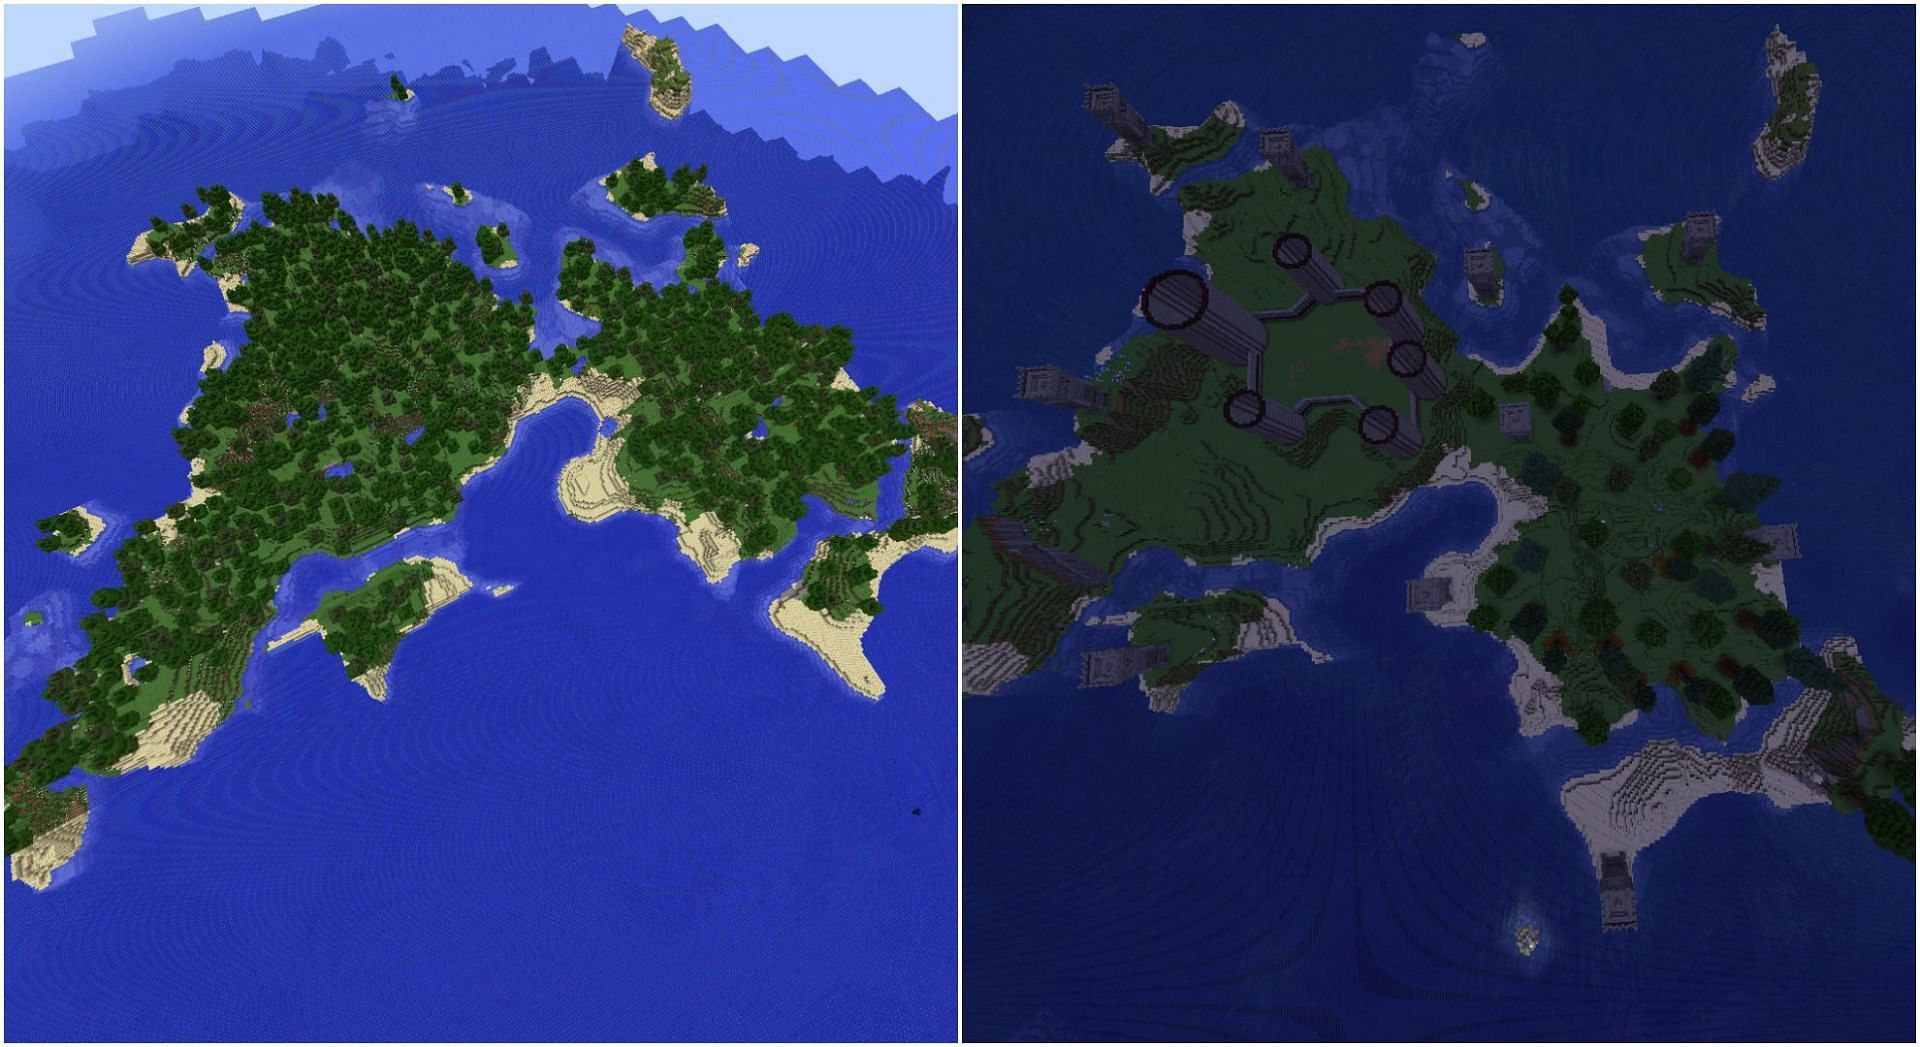 The island before and after clearing all the trees (Image via u/Breach04__ on Reddit)